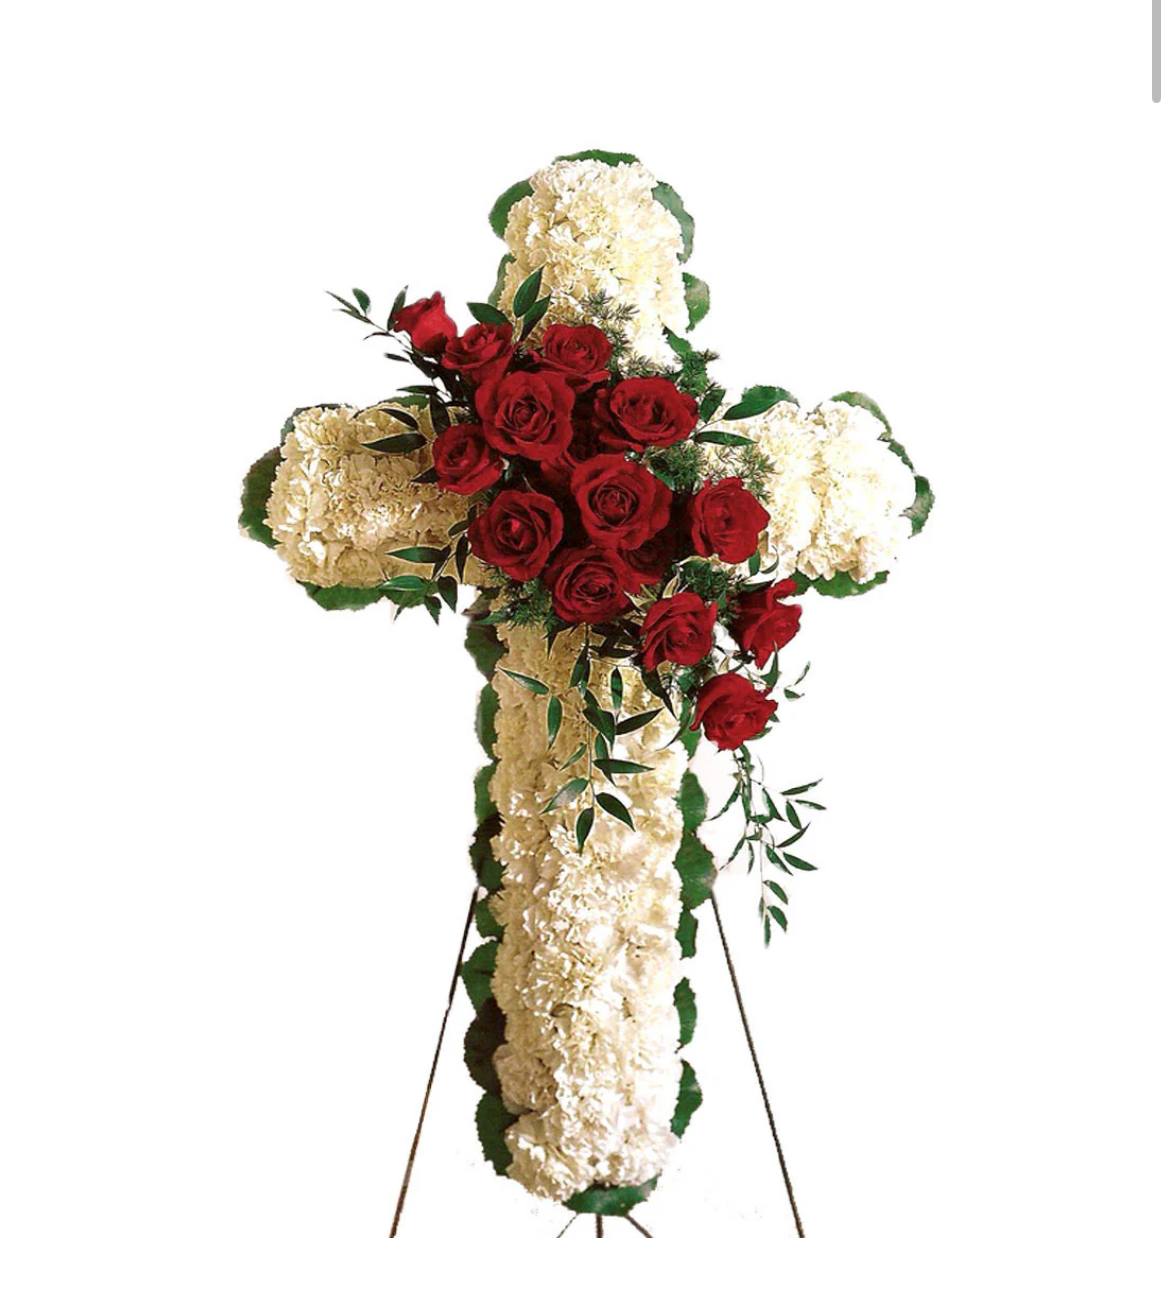 Cross With Rose Break - Simple and elegant describes this thoughtful floral cross of white carnations with a red rose break. Appropriate to send to the funeral home. Arrangement is delivered with an easel for display.  